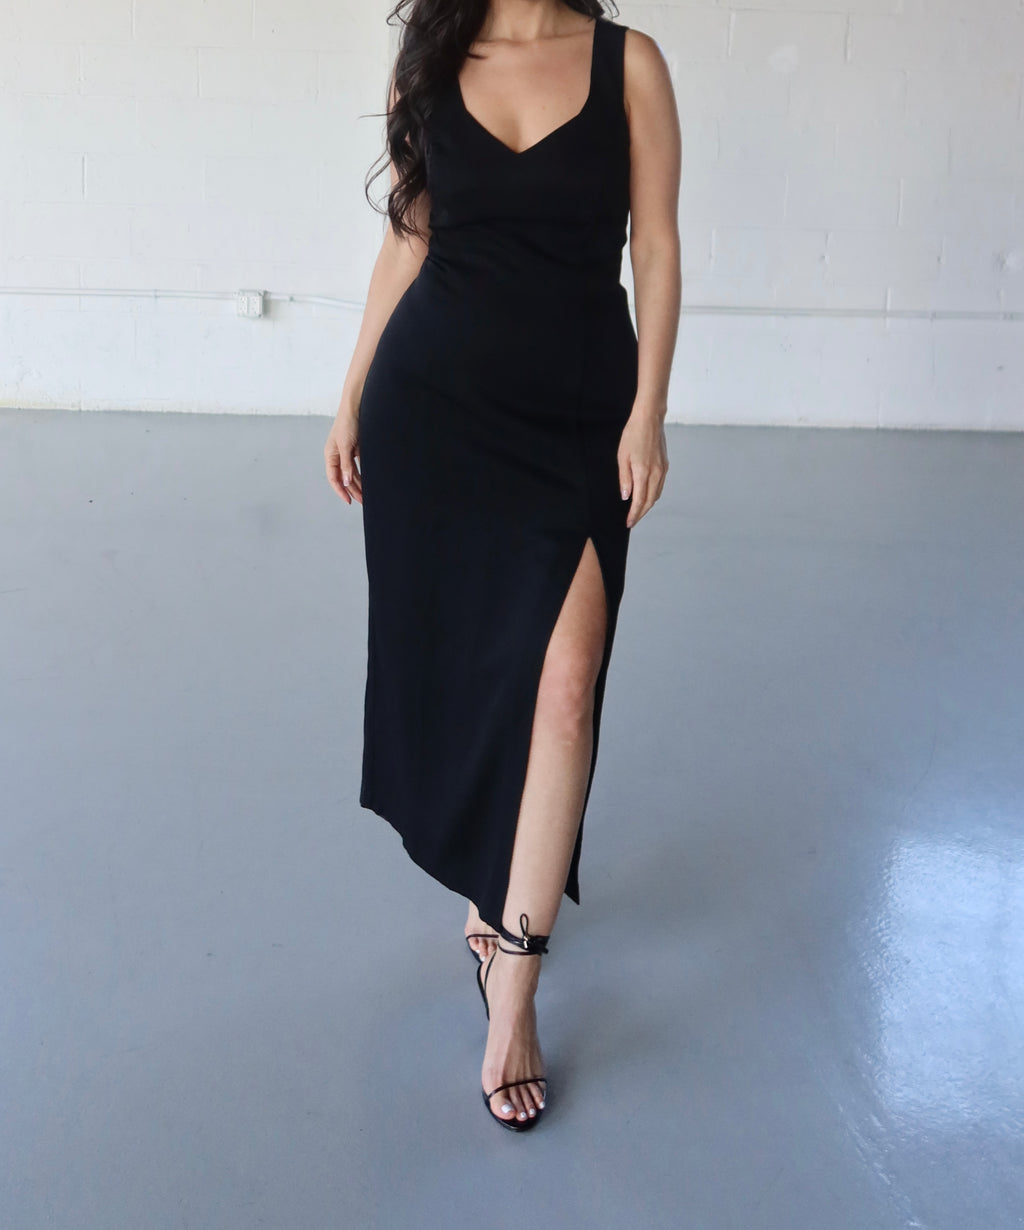 BLACK SLEEVELESS GOWN WITH HIGH SLIT - SIZE M